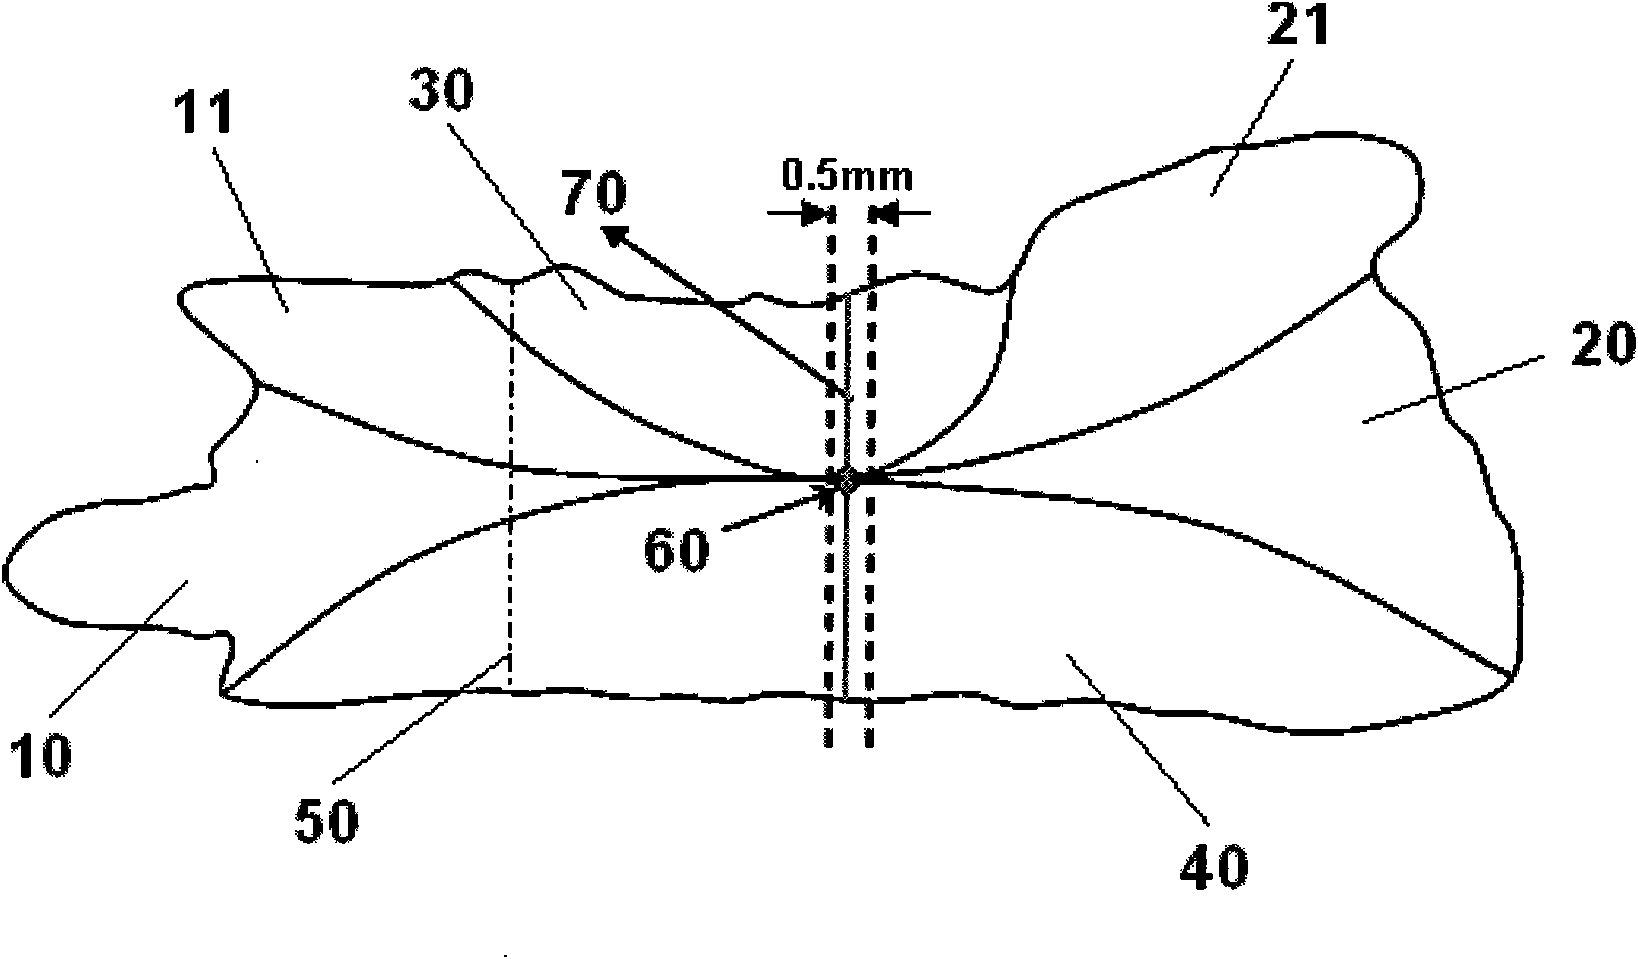 Preparation of mackerel otolith cross-sectional slices and method for determining age thereof